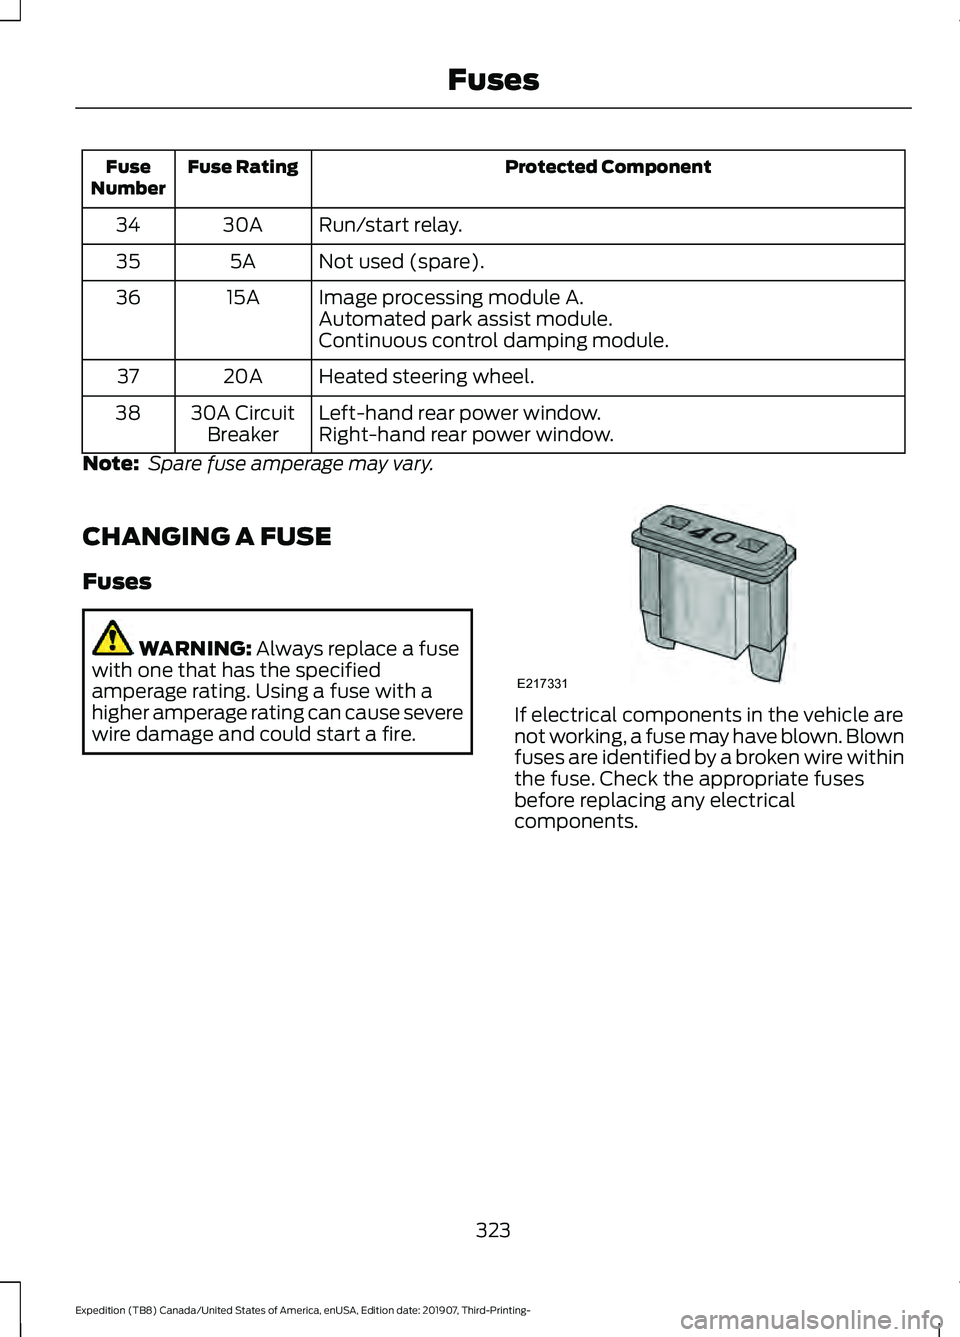 FORD EXPEDITION 2020 User Guide Protected Component
Fuse Rating
Fuse
Number
Run/start relay.
30A
34
Not used (spare).
5A
35
Image processing module A.
15A
36
Automated park assist module.
Continuous control damping module.
Heated st